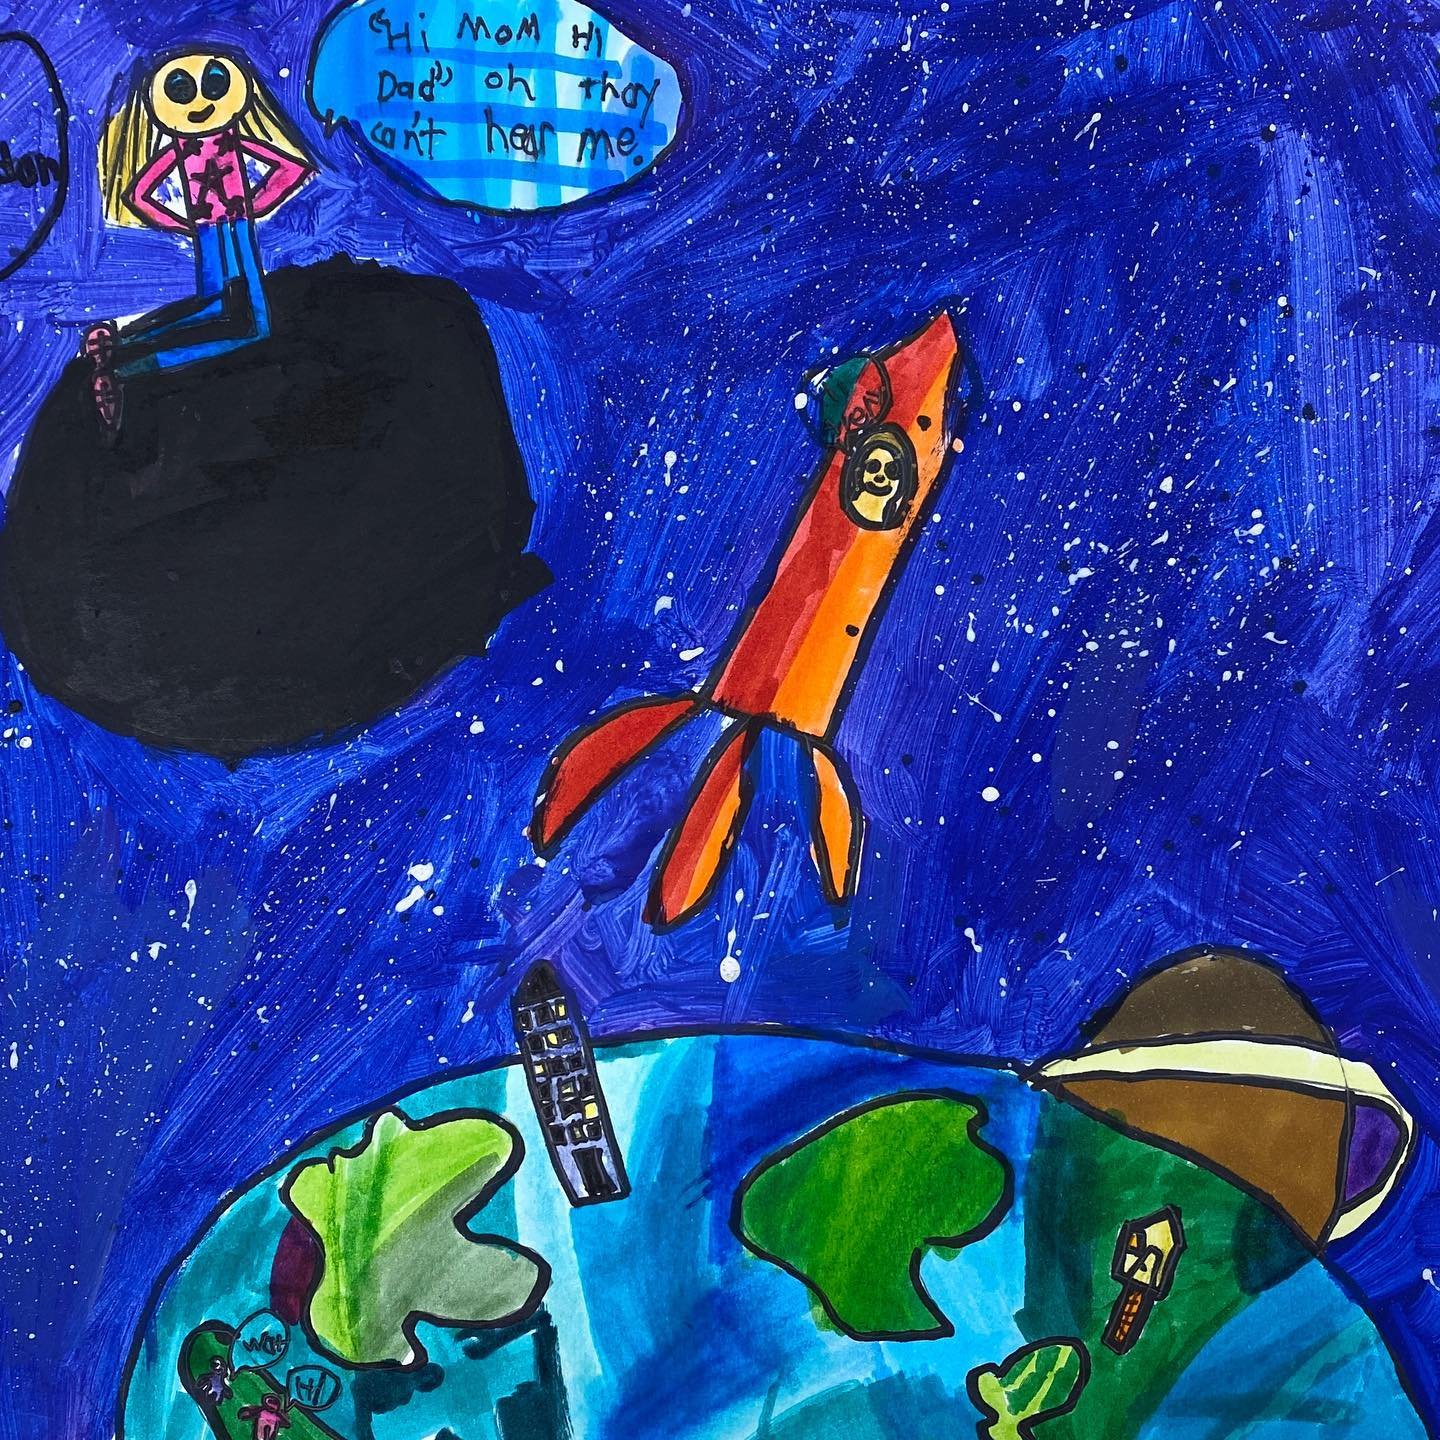 &ldquo;The Earth is&hellip; just the beginning,&rdquo; mixed media painting by a first grader